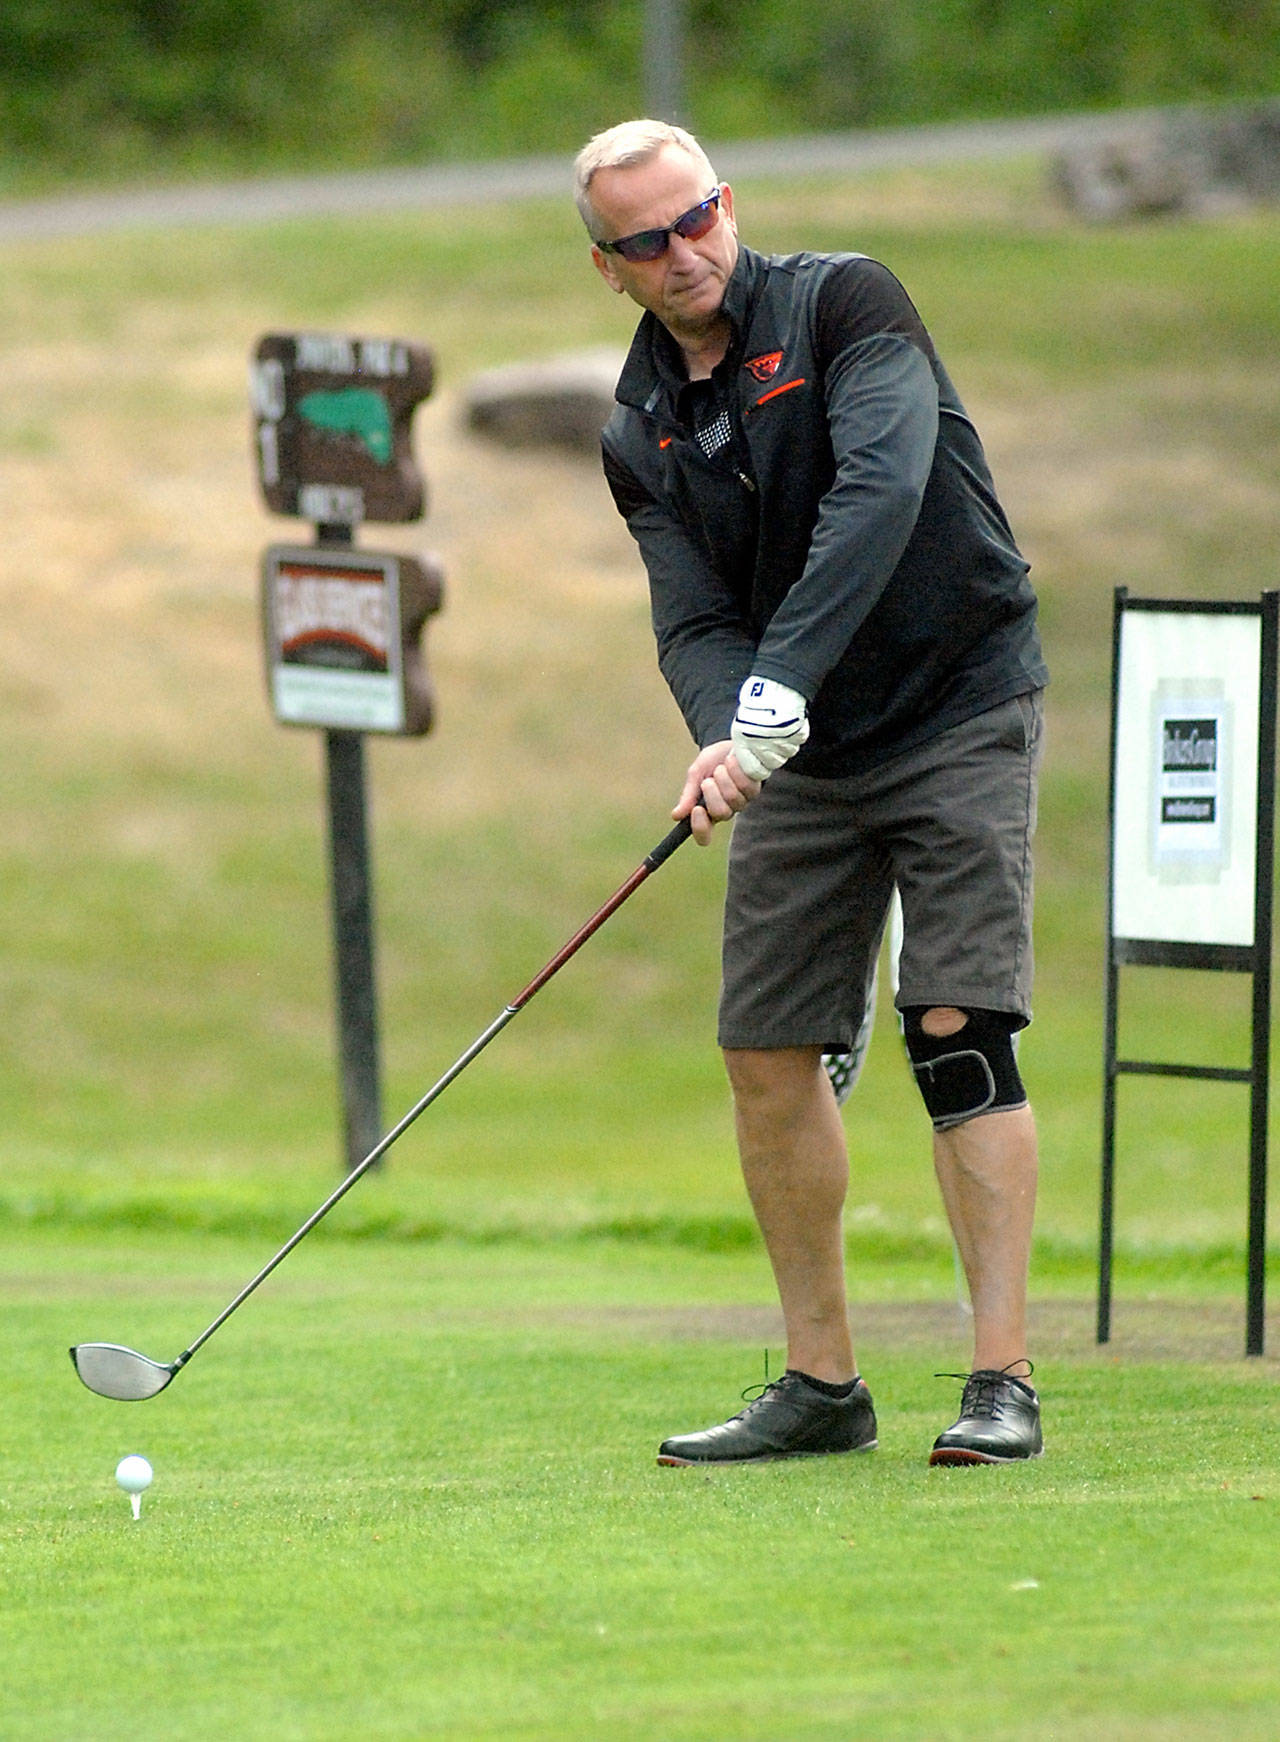 Keith Thorpe/Peninsula Daily News Peninsula Golf Club member Rick Hoover of Port Angeles tees off on the first hole of the Clallam County Amateur at Peninsula Golf Club in Port Angeles on Friday. The tournament wraps up today at Cedars at Dungeness in Sequim. Curtis Rose of Victoria’s Madrona Links Golf Course and Jade Tisdale of Peninsula Golf Club were tied for the lead after posting rounds of 3-over-par 75.